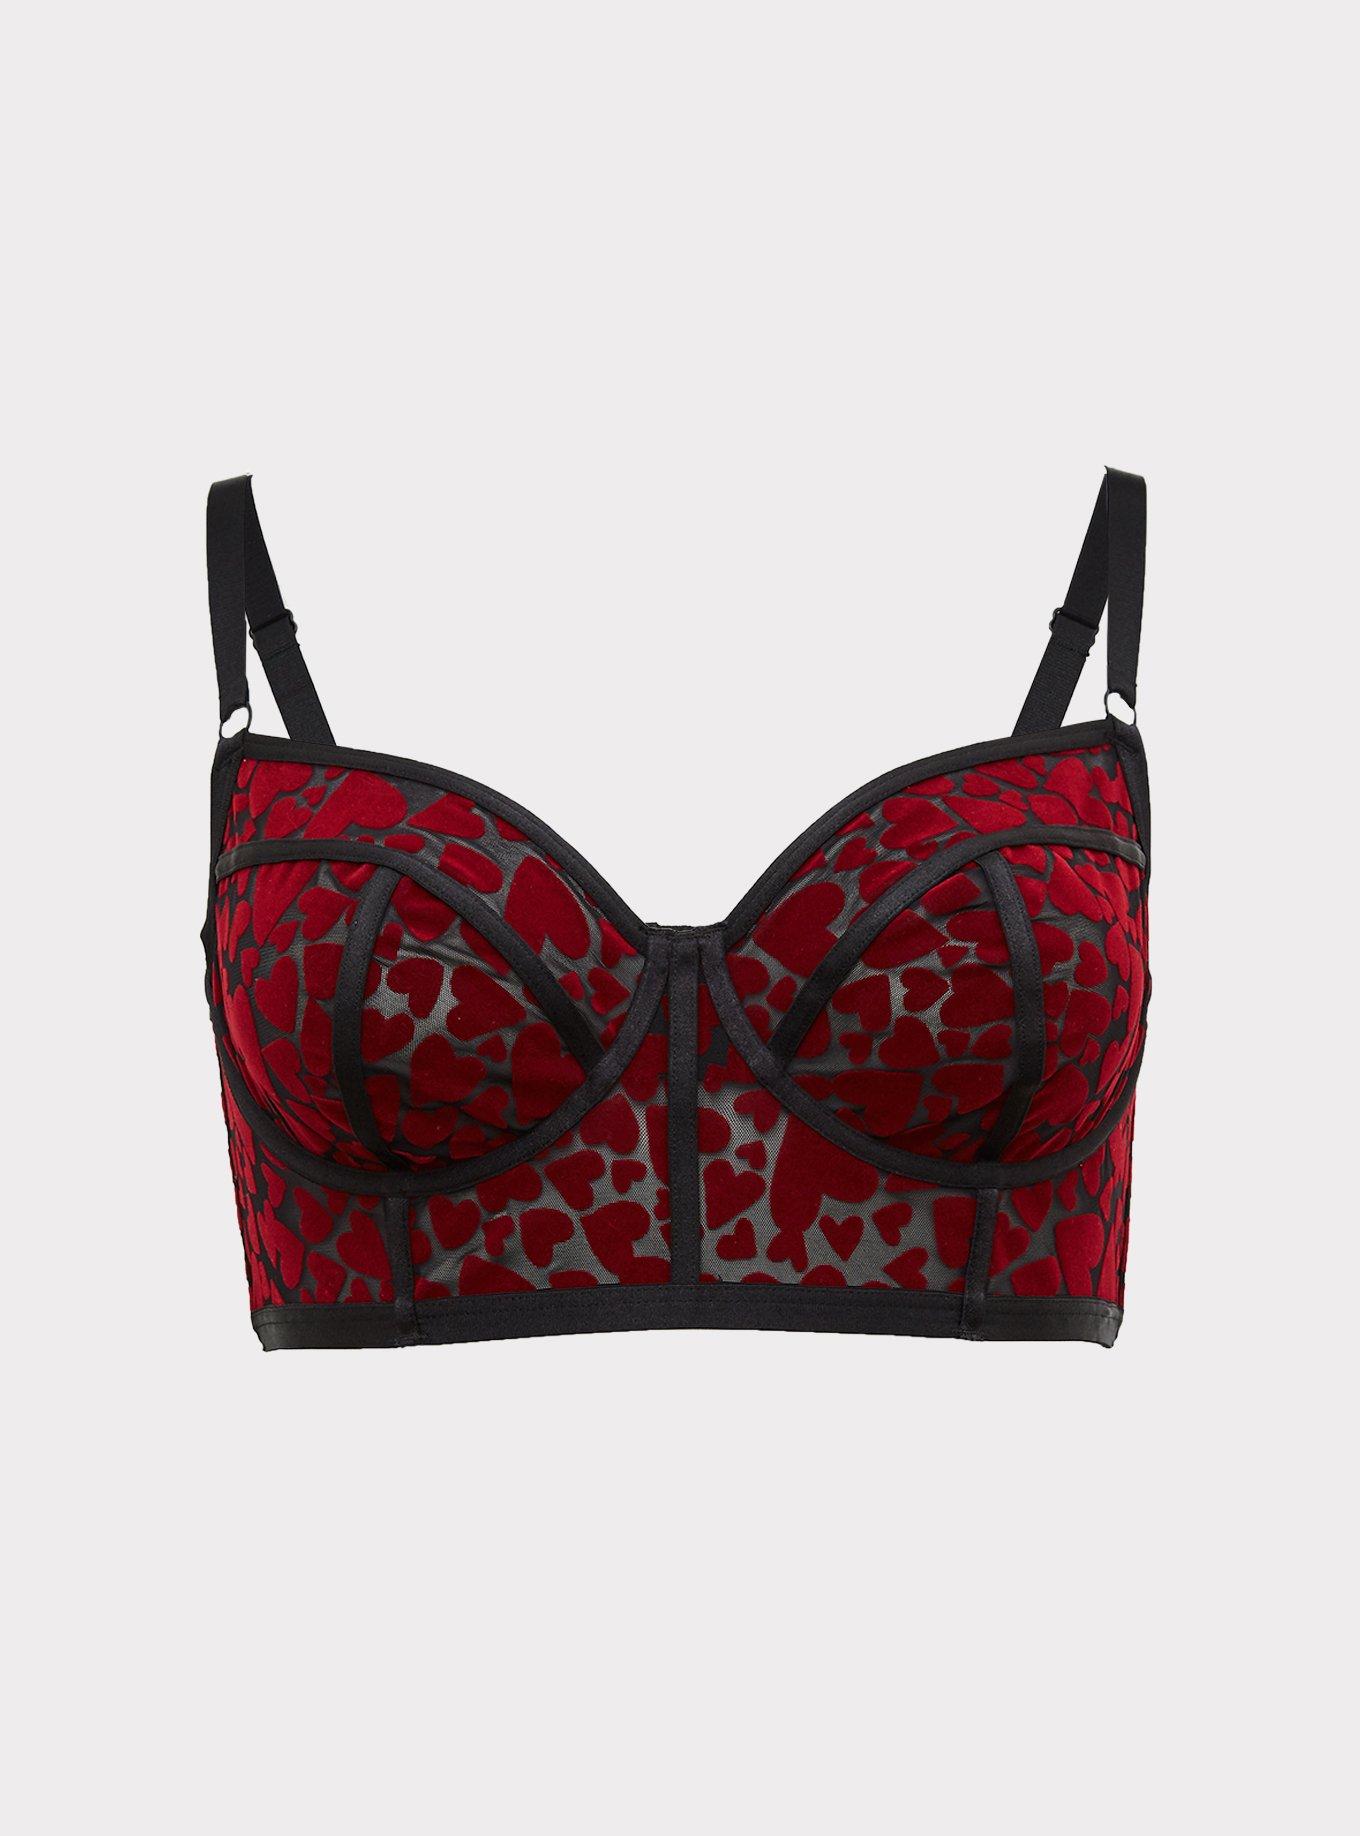 Black lace red hearts wired bralette